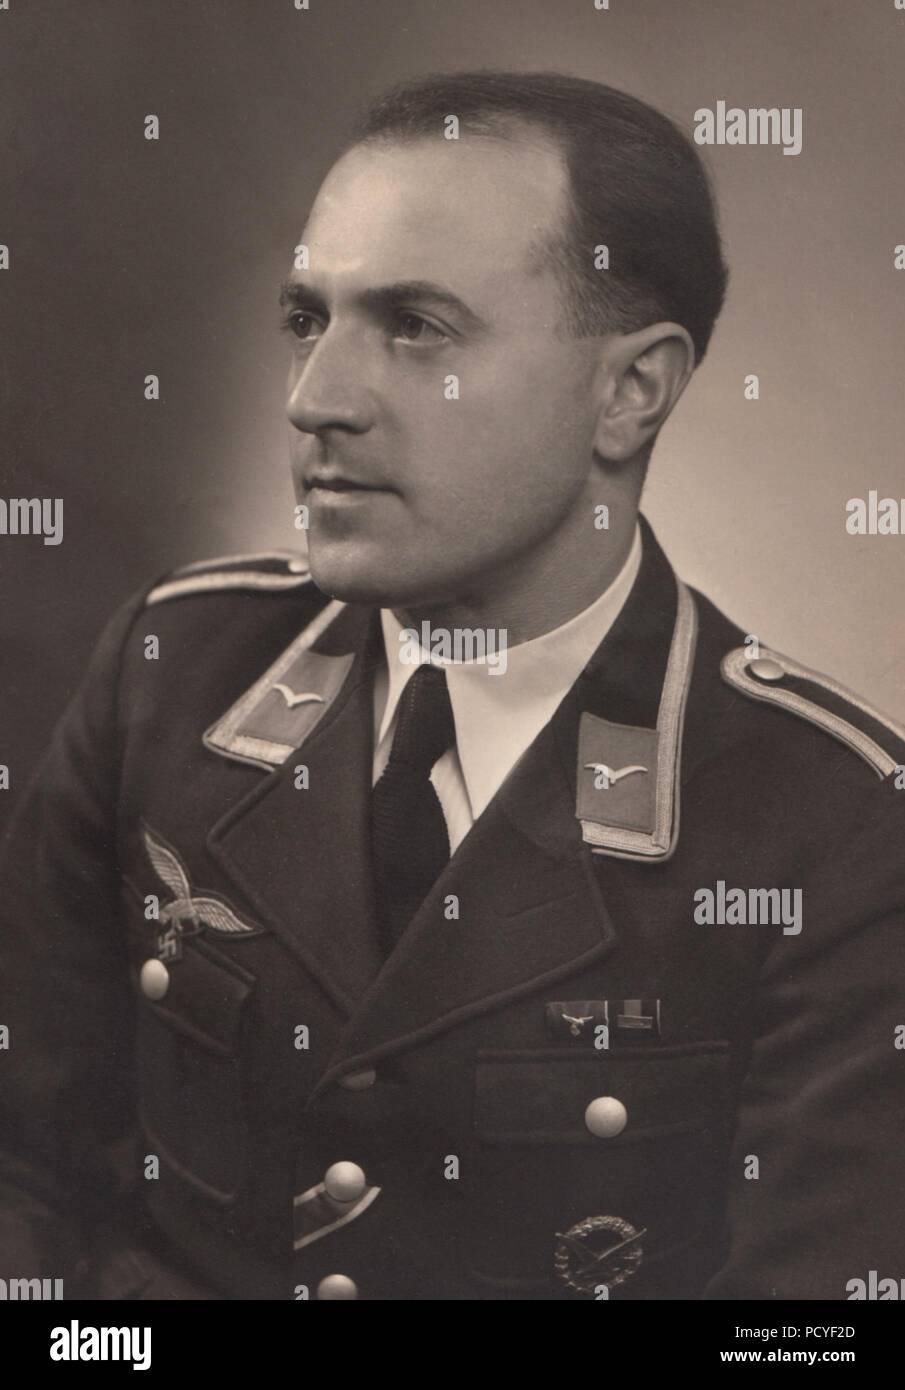 Image from the photo album of Oberfeldwebel Gotthilf Benseler of 9. Staffel, Kampfgeschwader 3: Portrait of Gotthilf Benseler as an Unteroffizier, showing him wearing the Luftwaffe Radio Operator/Air Gunner Award Badge and medal bar with ribbons for Long Service Medal IV Class and Commemorative Medal for the 1st October 1938  with Prague Castle Bar. Stock Photo